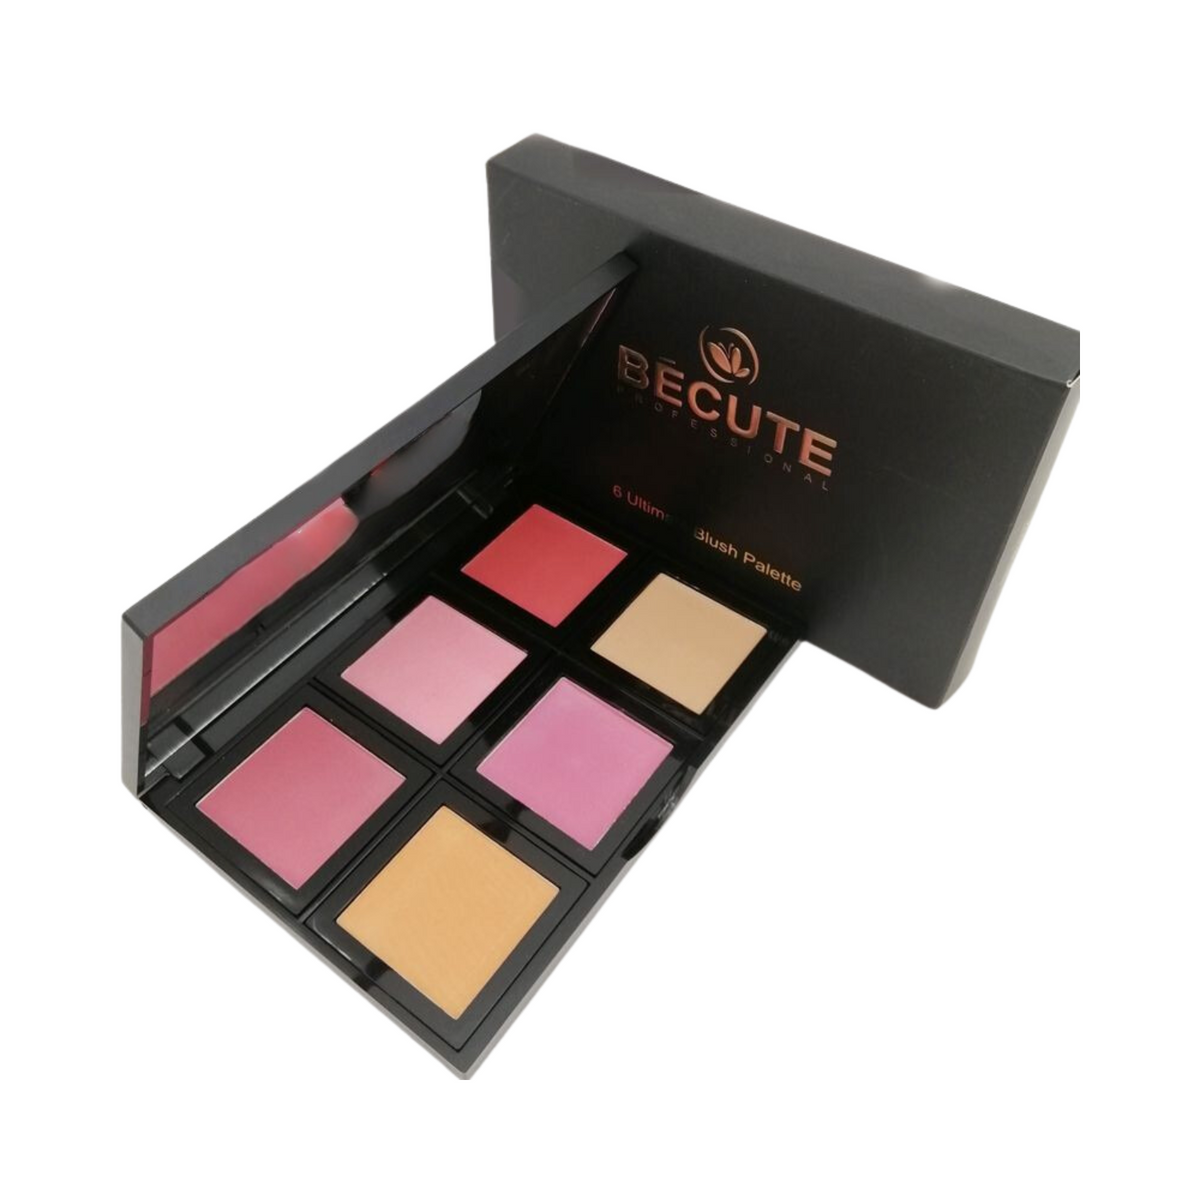 becute-blush-on-palette-6-color-multi-colors-shades